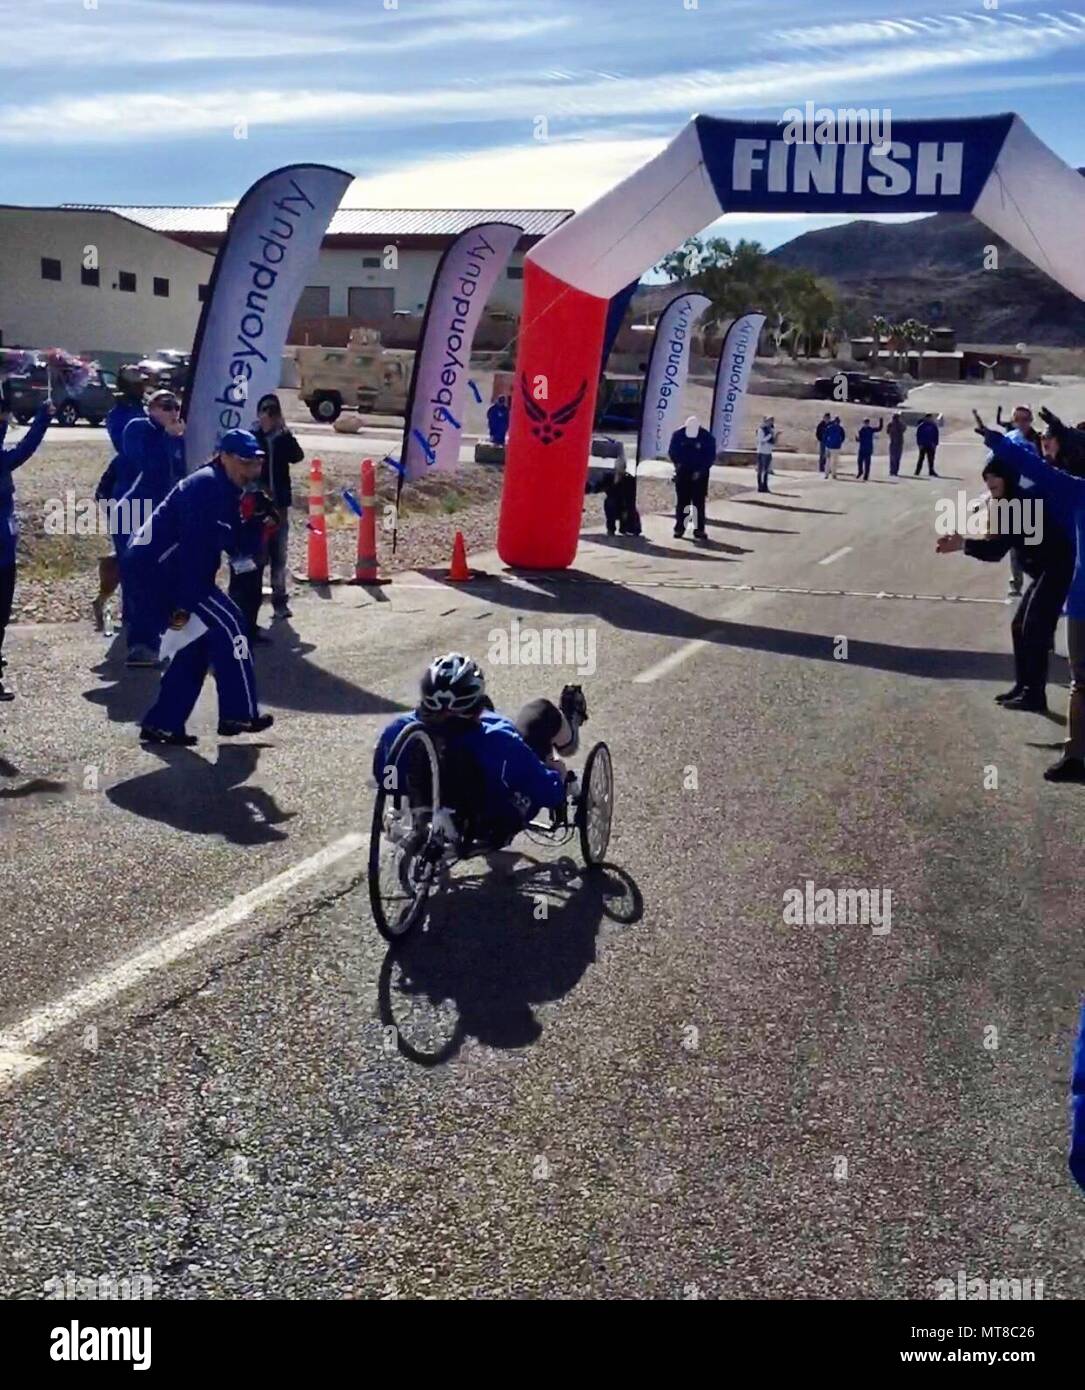 Lt Col Jackie Burns, 552d Air Control Group, 552d Air Control Wing, prepares to cross the finish line on her way to earning a Silver Medal in Cycling on a recumbent bike. This event took place at the Wounded Warrior Trials held February 17, 2017, at Nellis Air Force Base, Nevada.  Burns was selected to the primary Air Force team which will compete at the Warrior Games June 30 - July 8, 2017 in Chicago.  (Air Force photo by Marty Burns) Stock Photo